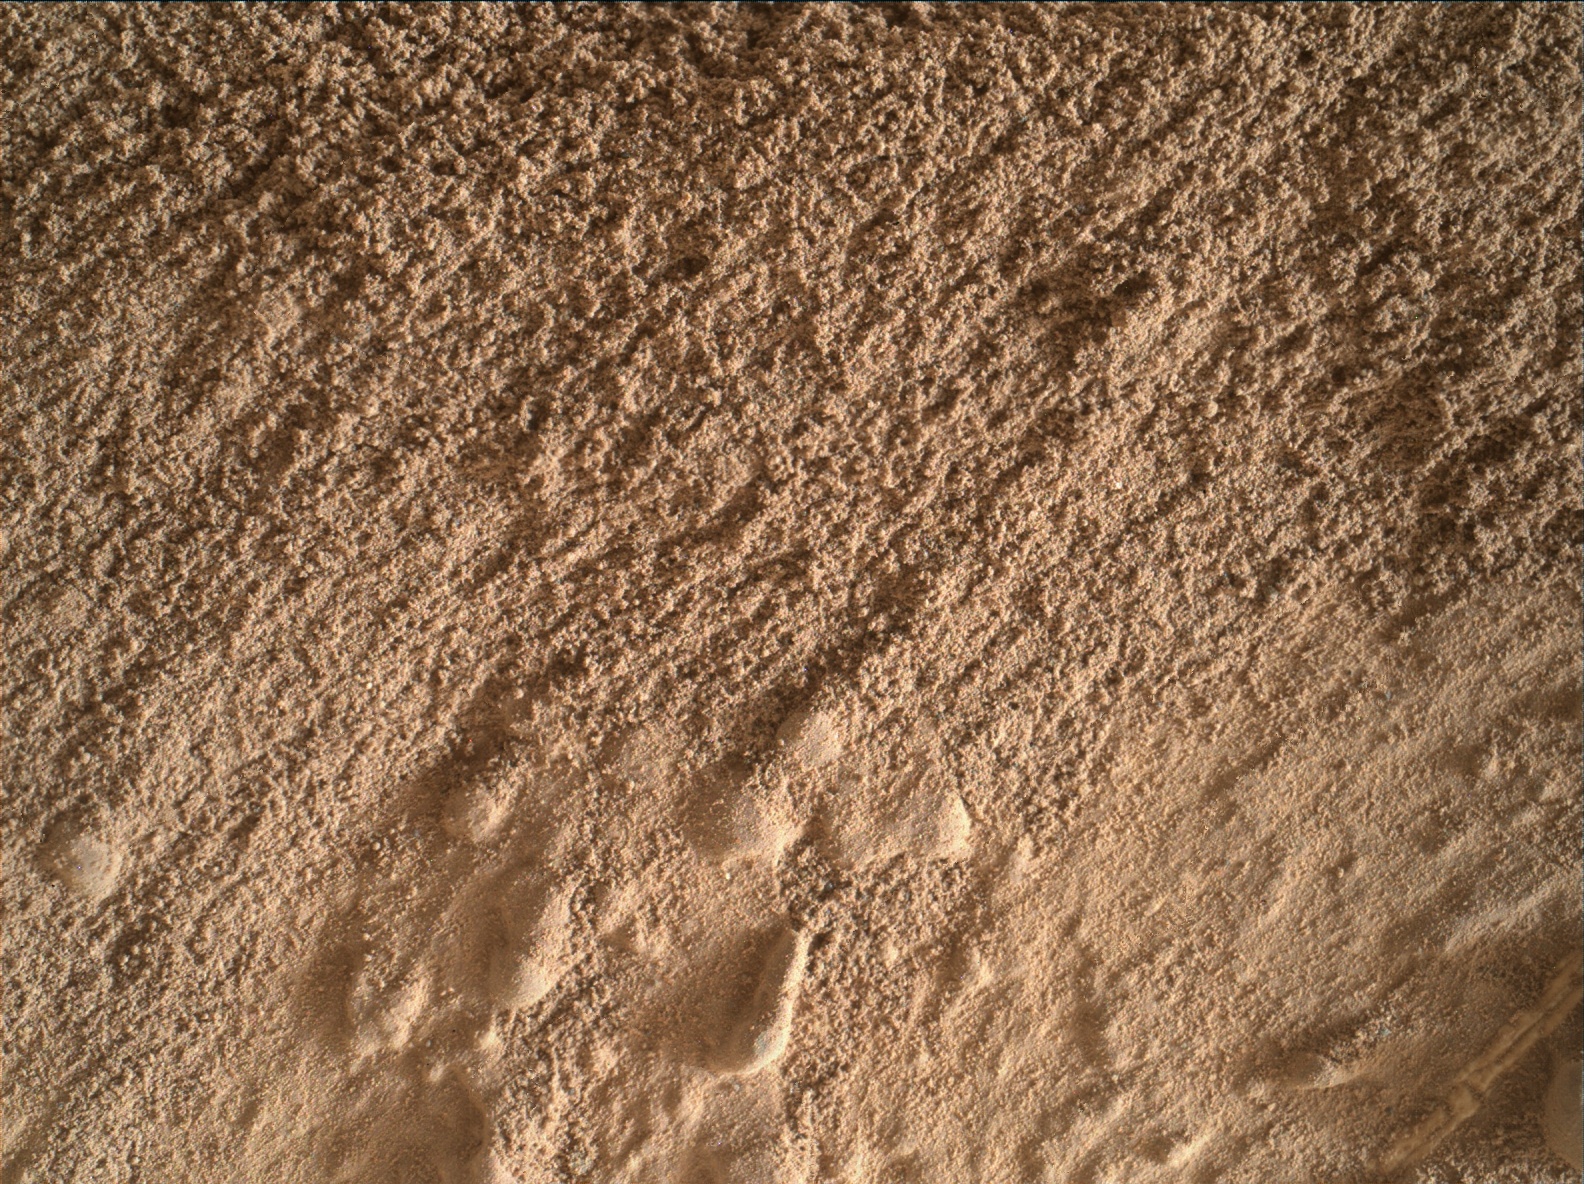 Nasa's Mars rover Curiosity acquired this image using its Mars Hand Lens Imager (MAHLI) on Sol 1494